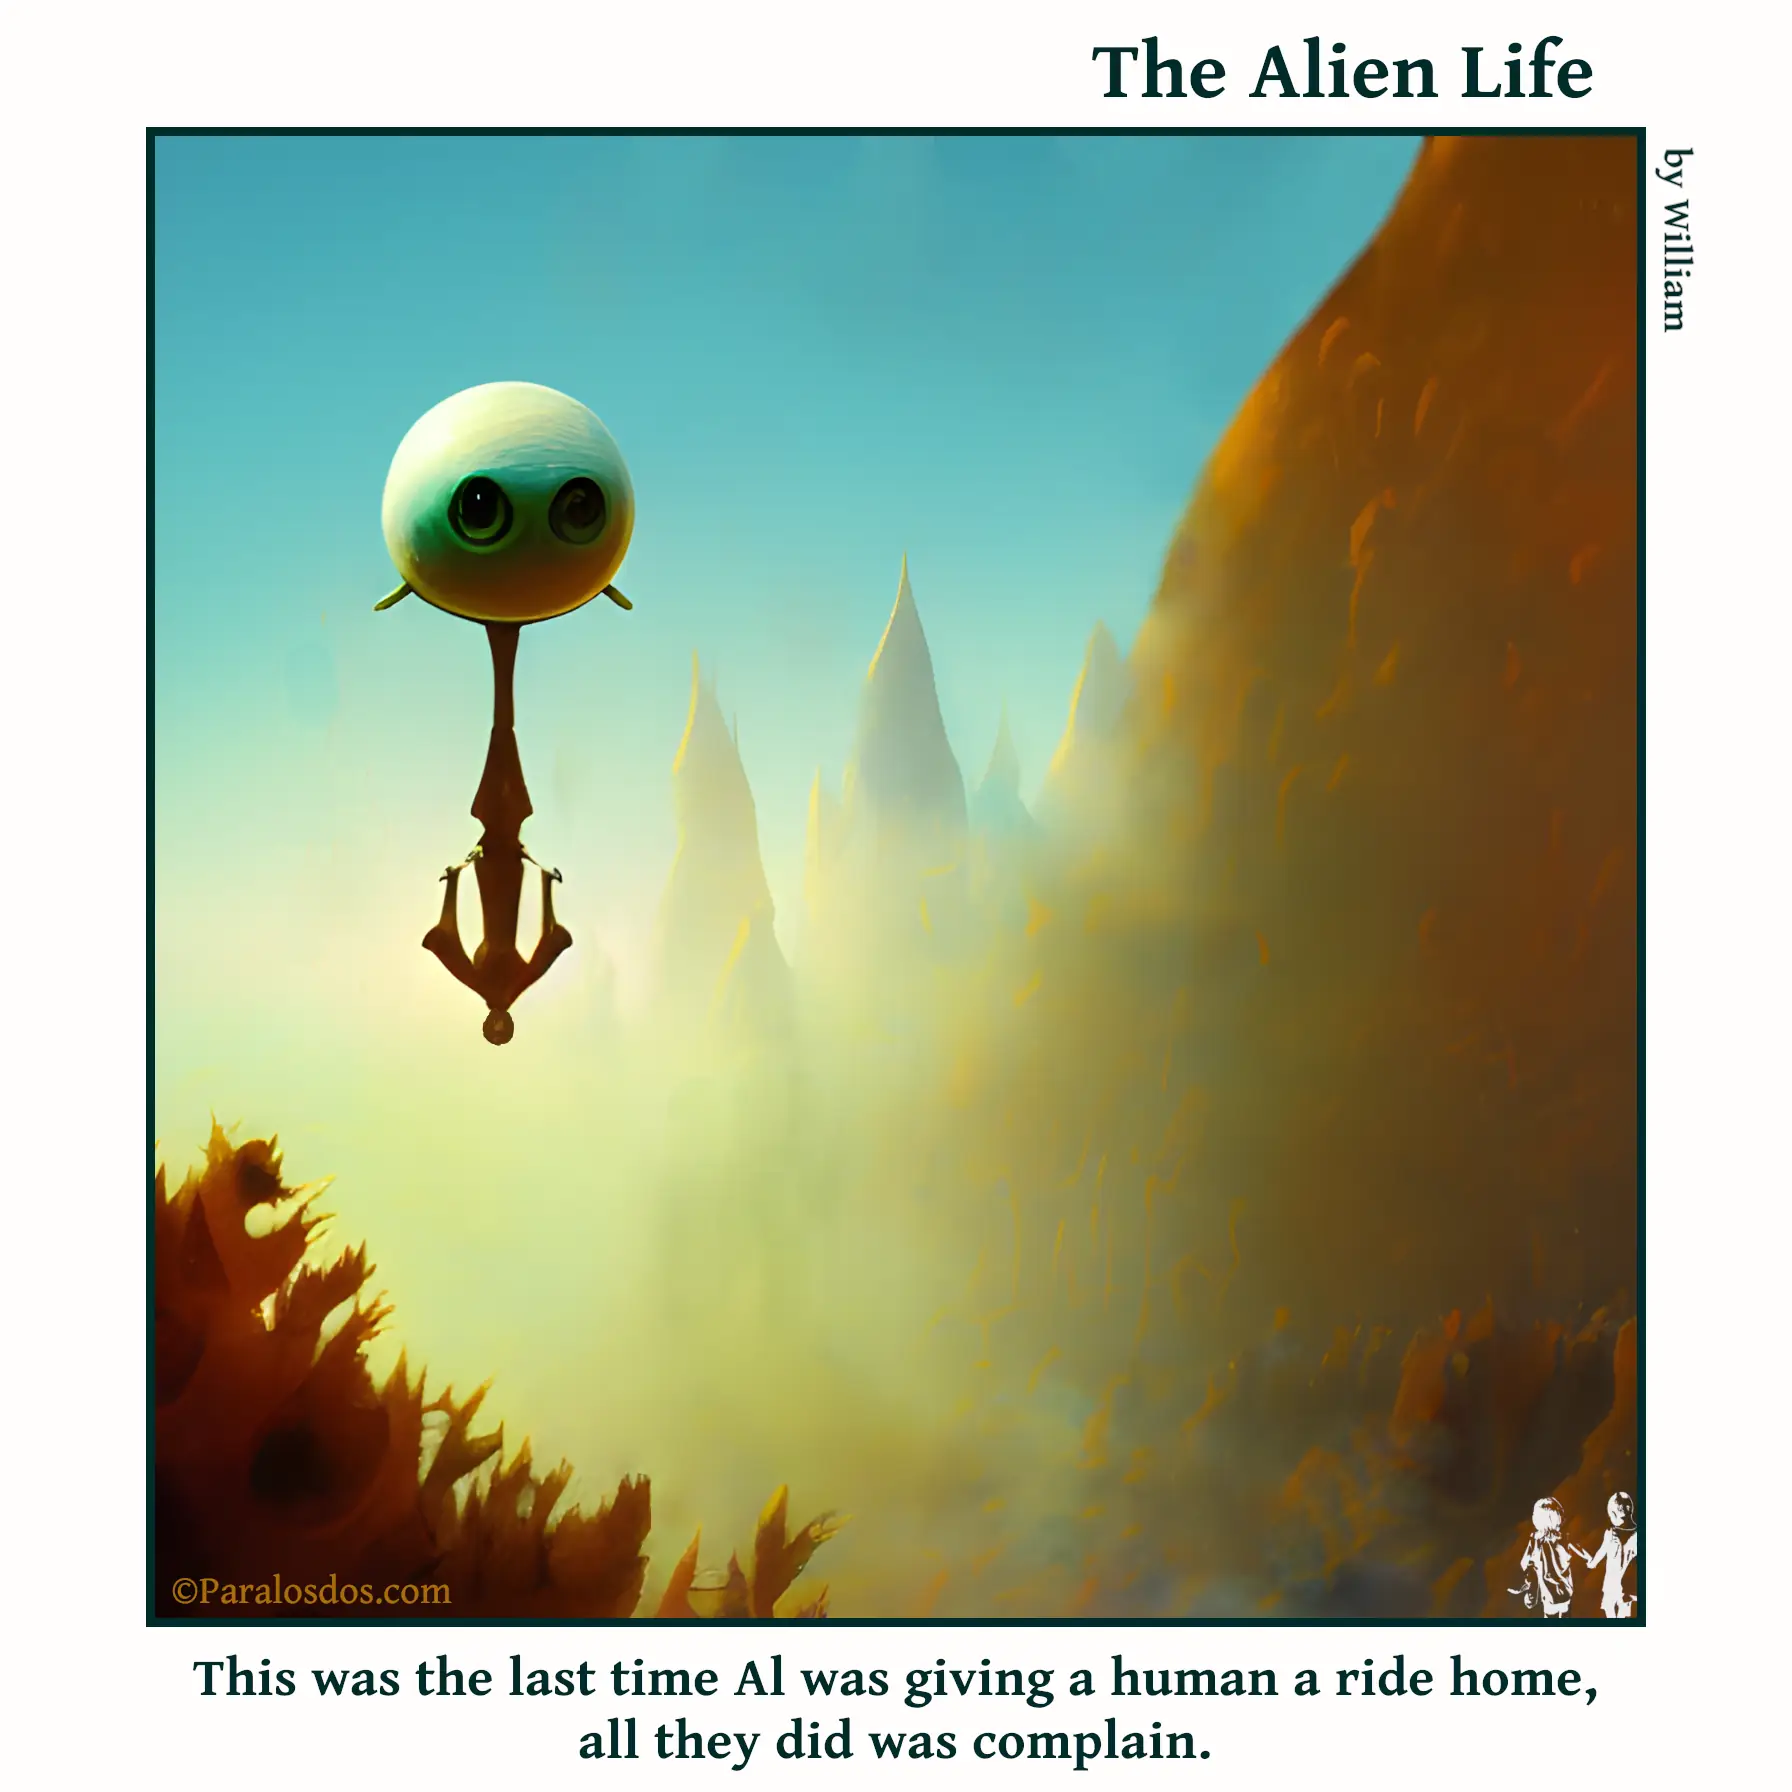 The Alien Life, one panel Comic. A flying alien is ferrying a human passenger in the skies. The human is upside down and the alien is hanging onto the human's feet. The caption reads: This was the last time Al was giving a human a ride home, all they did was complain.